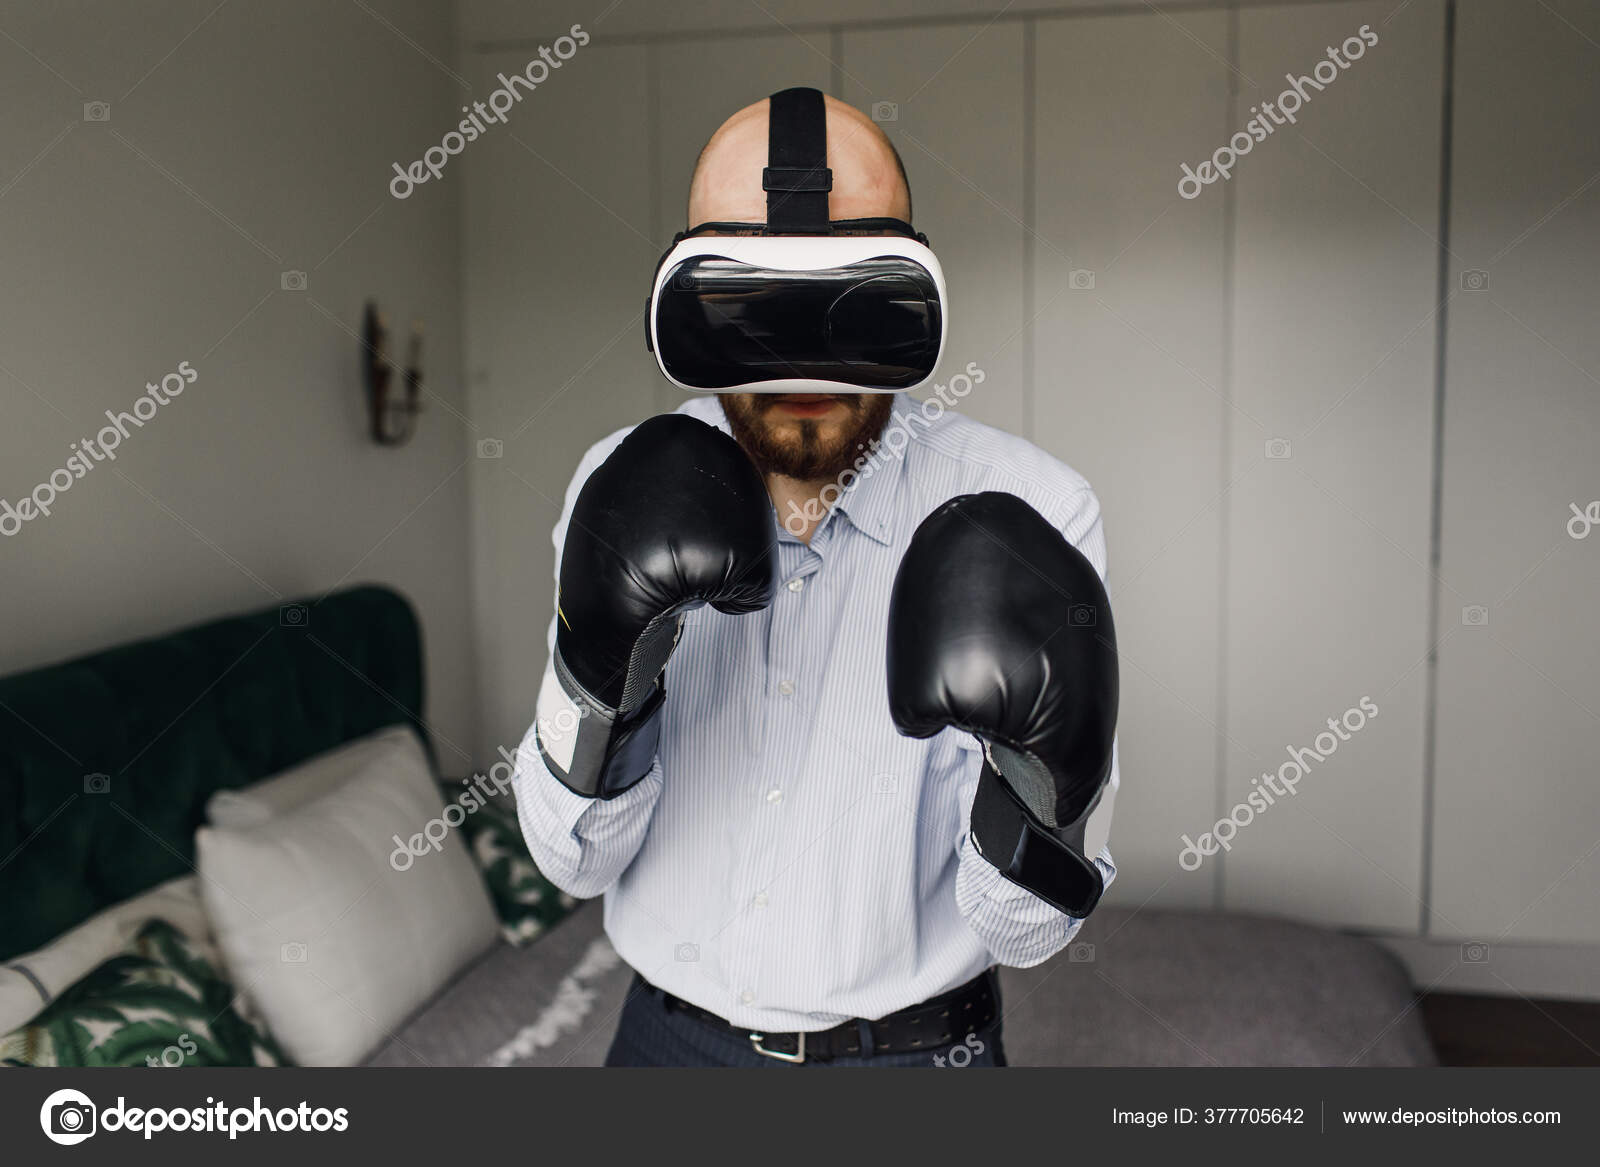 Augmented 3D world. Cyber sportsman boxing gloves. Man play game in VR glasses. Cyber sport concept. Man boxer virtual reality headset simulation